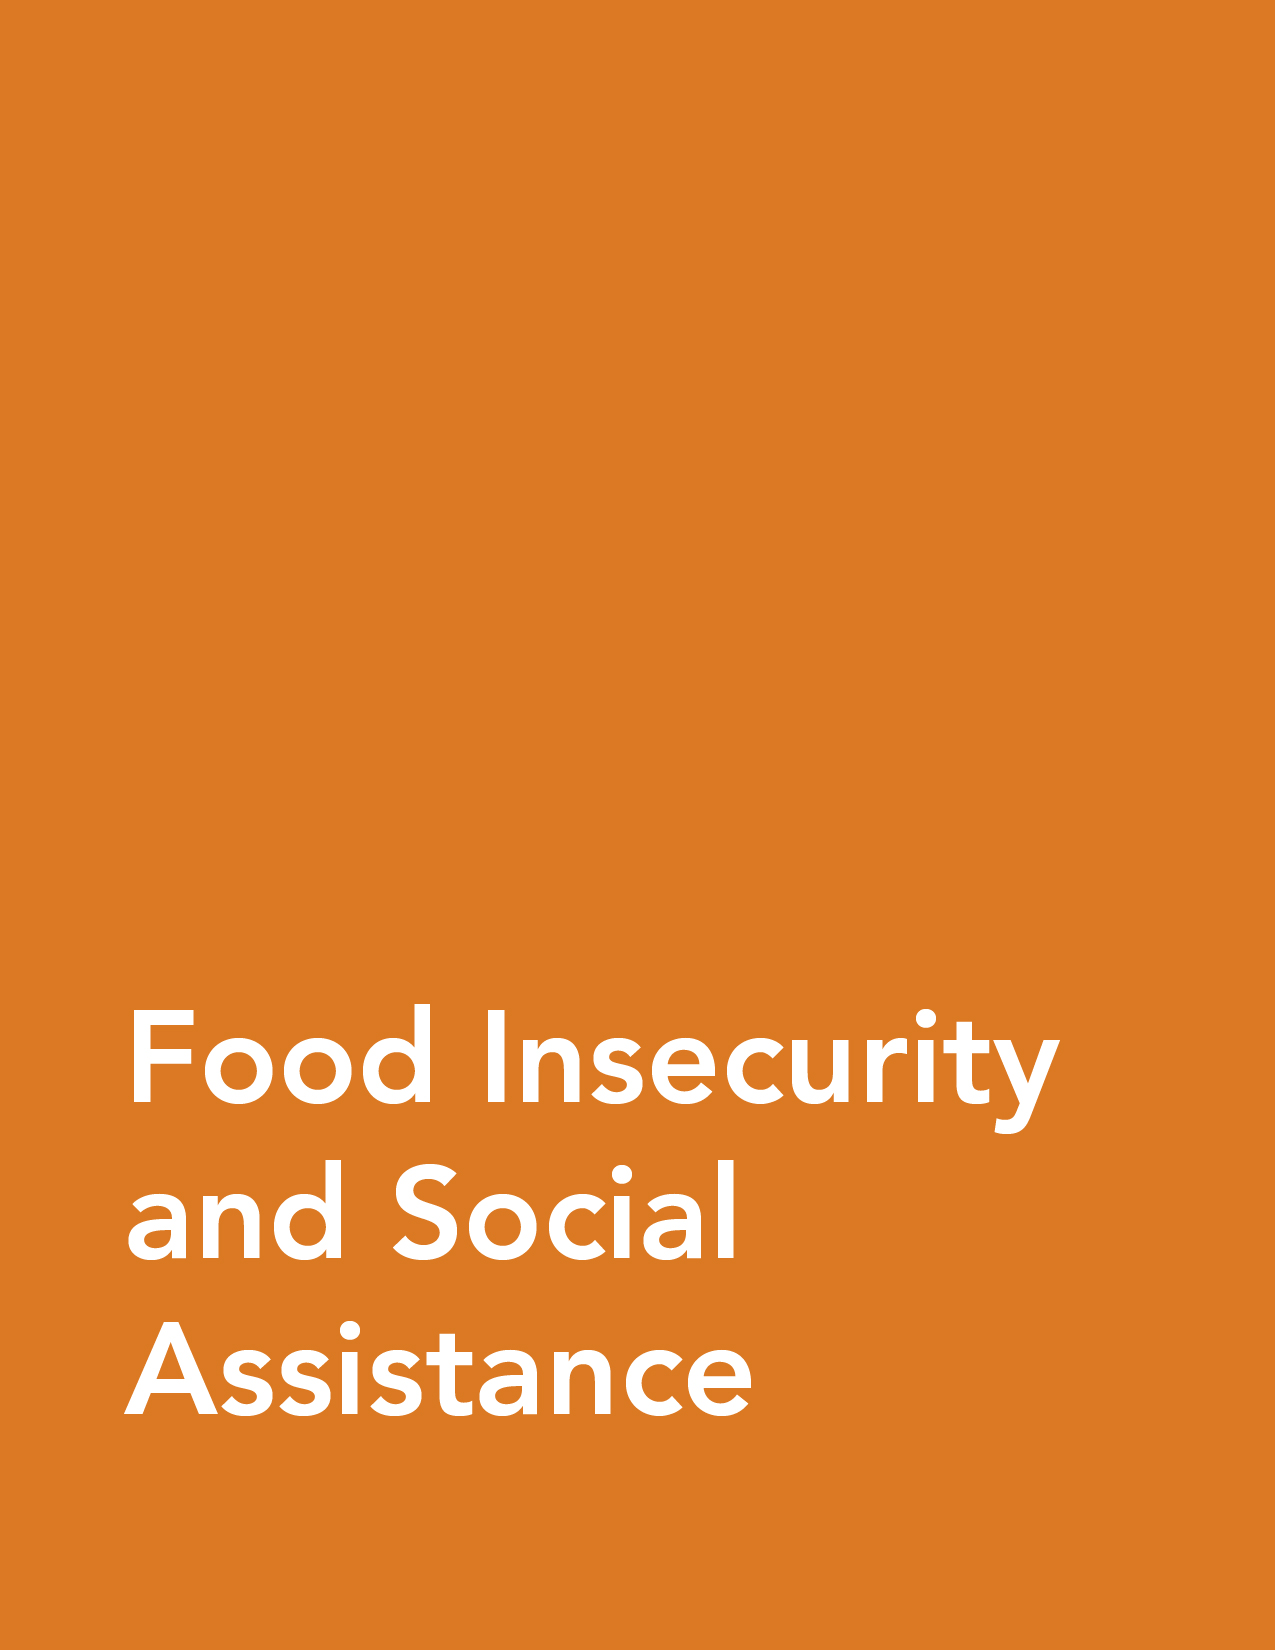 Fact Sheet: Food Insecurity and Social Assistance